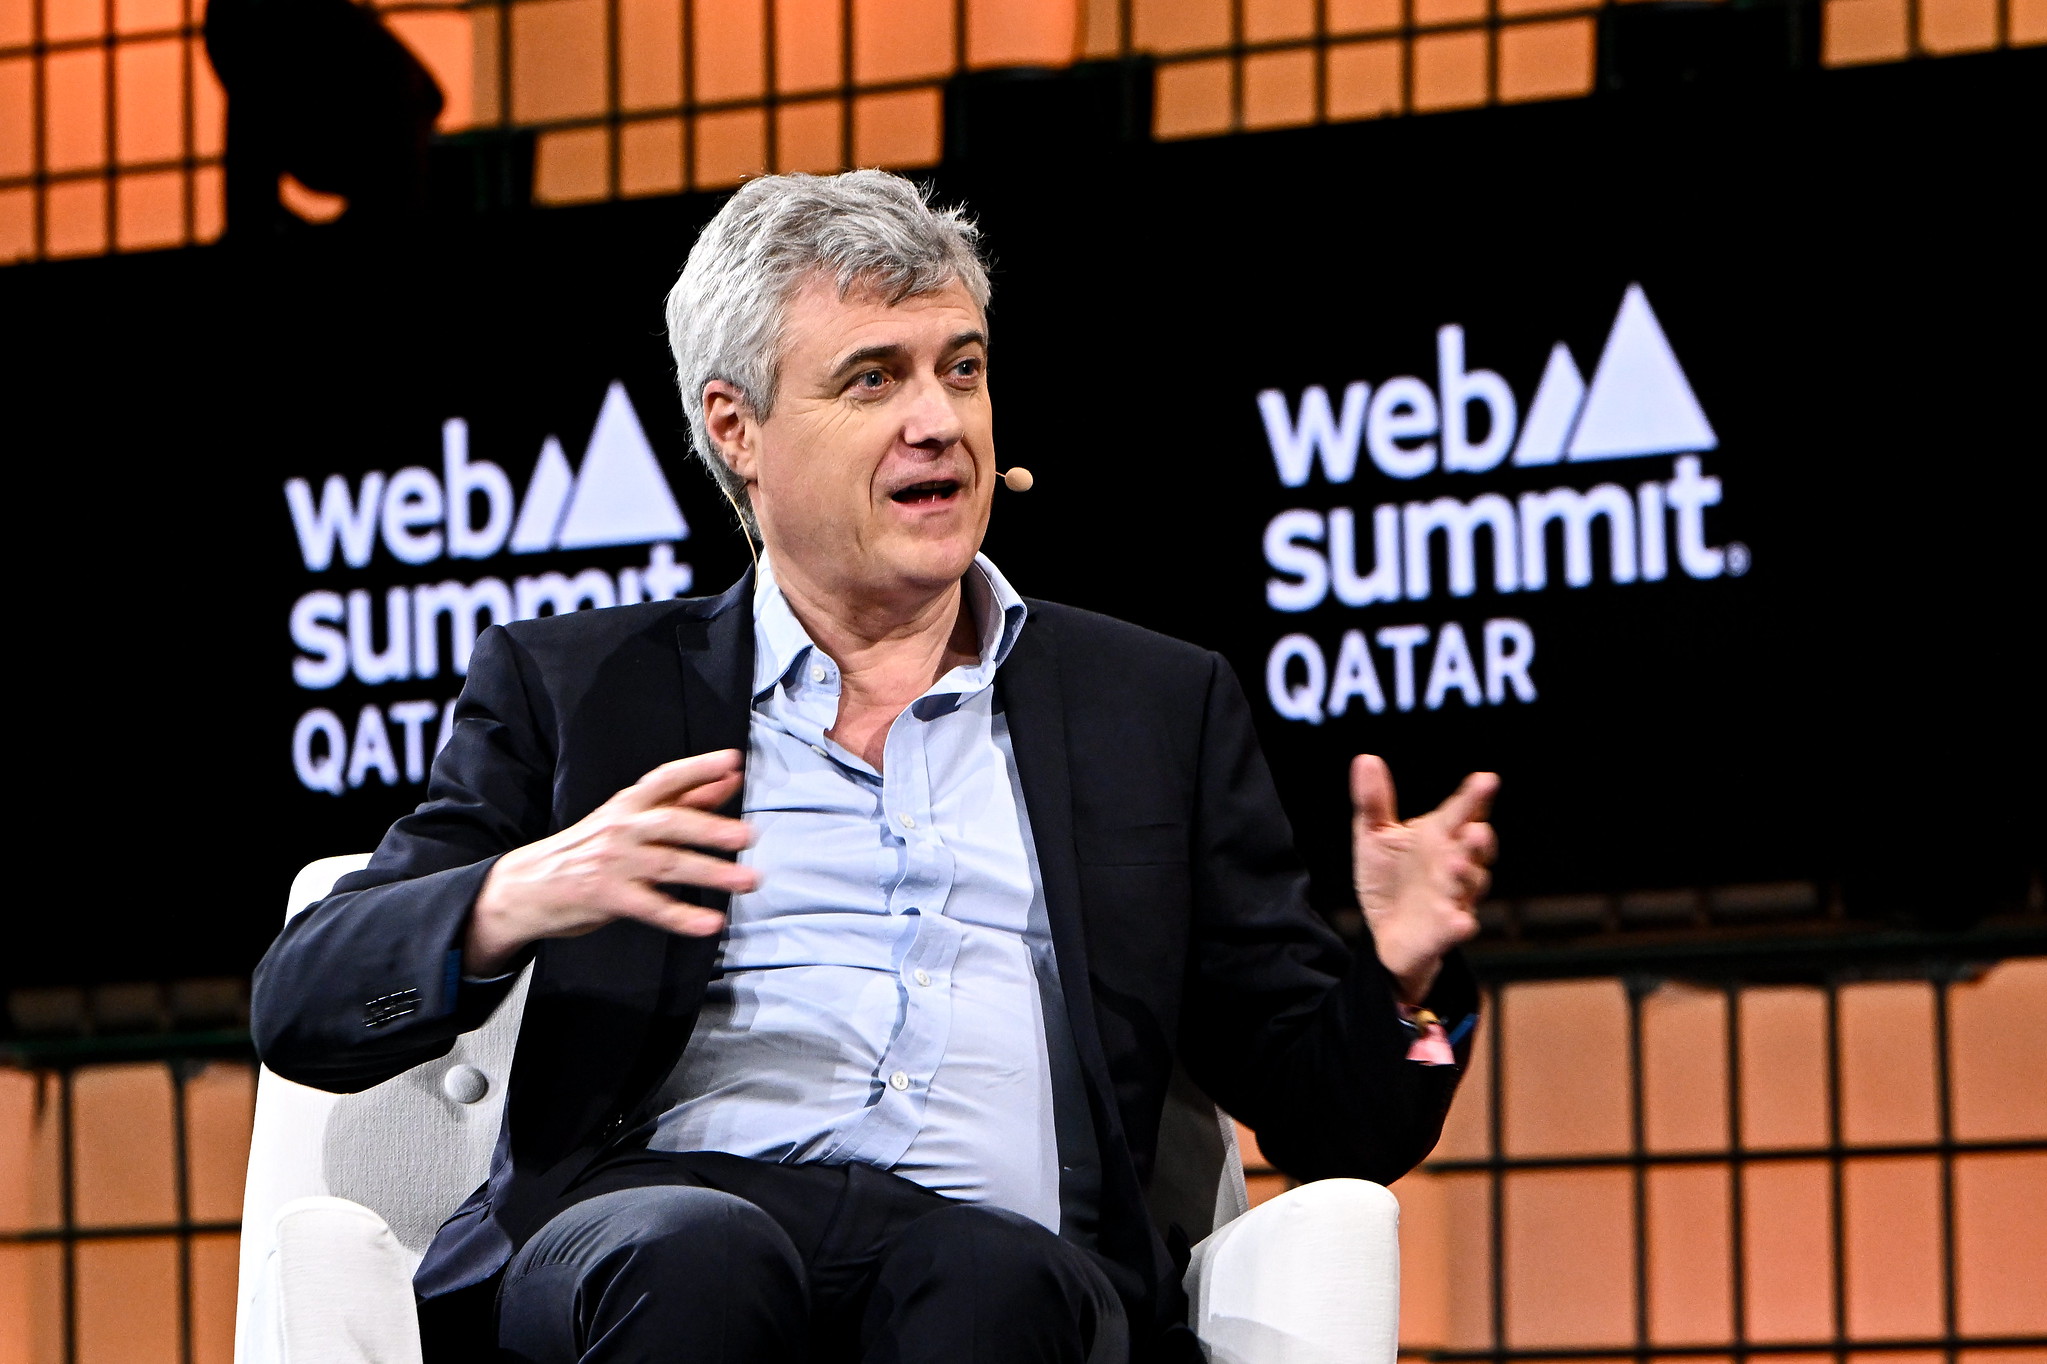 A photograph of Mark Read, CEO of WPP, speaking on stage at Web Summit Qatar. Mark is gesturing with hands and wearing an on-ear microphone. Mark is sitting on a chair and appears to be speaking. The Web Summit Qatar logo is visible in the background.